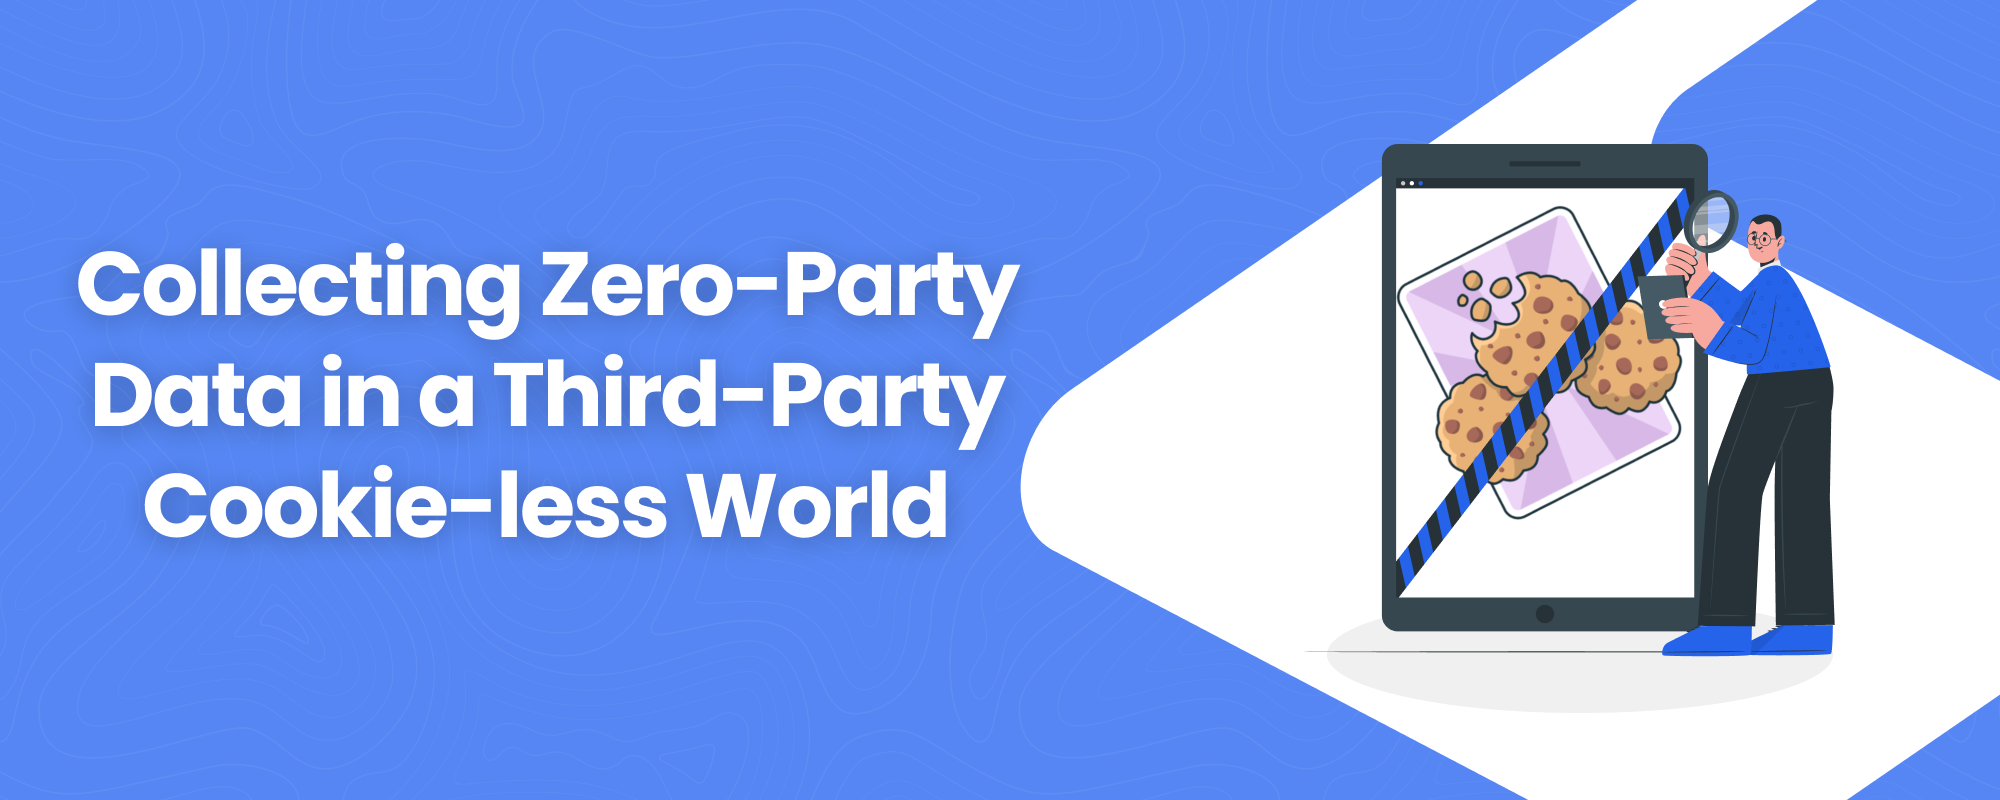 Why It Is Important to Collect Zero-Party Data in a Third-Party Cookie-Less Future?